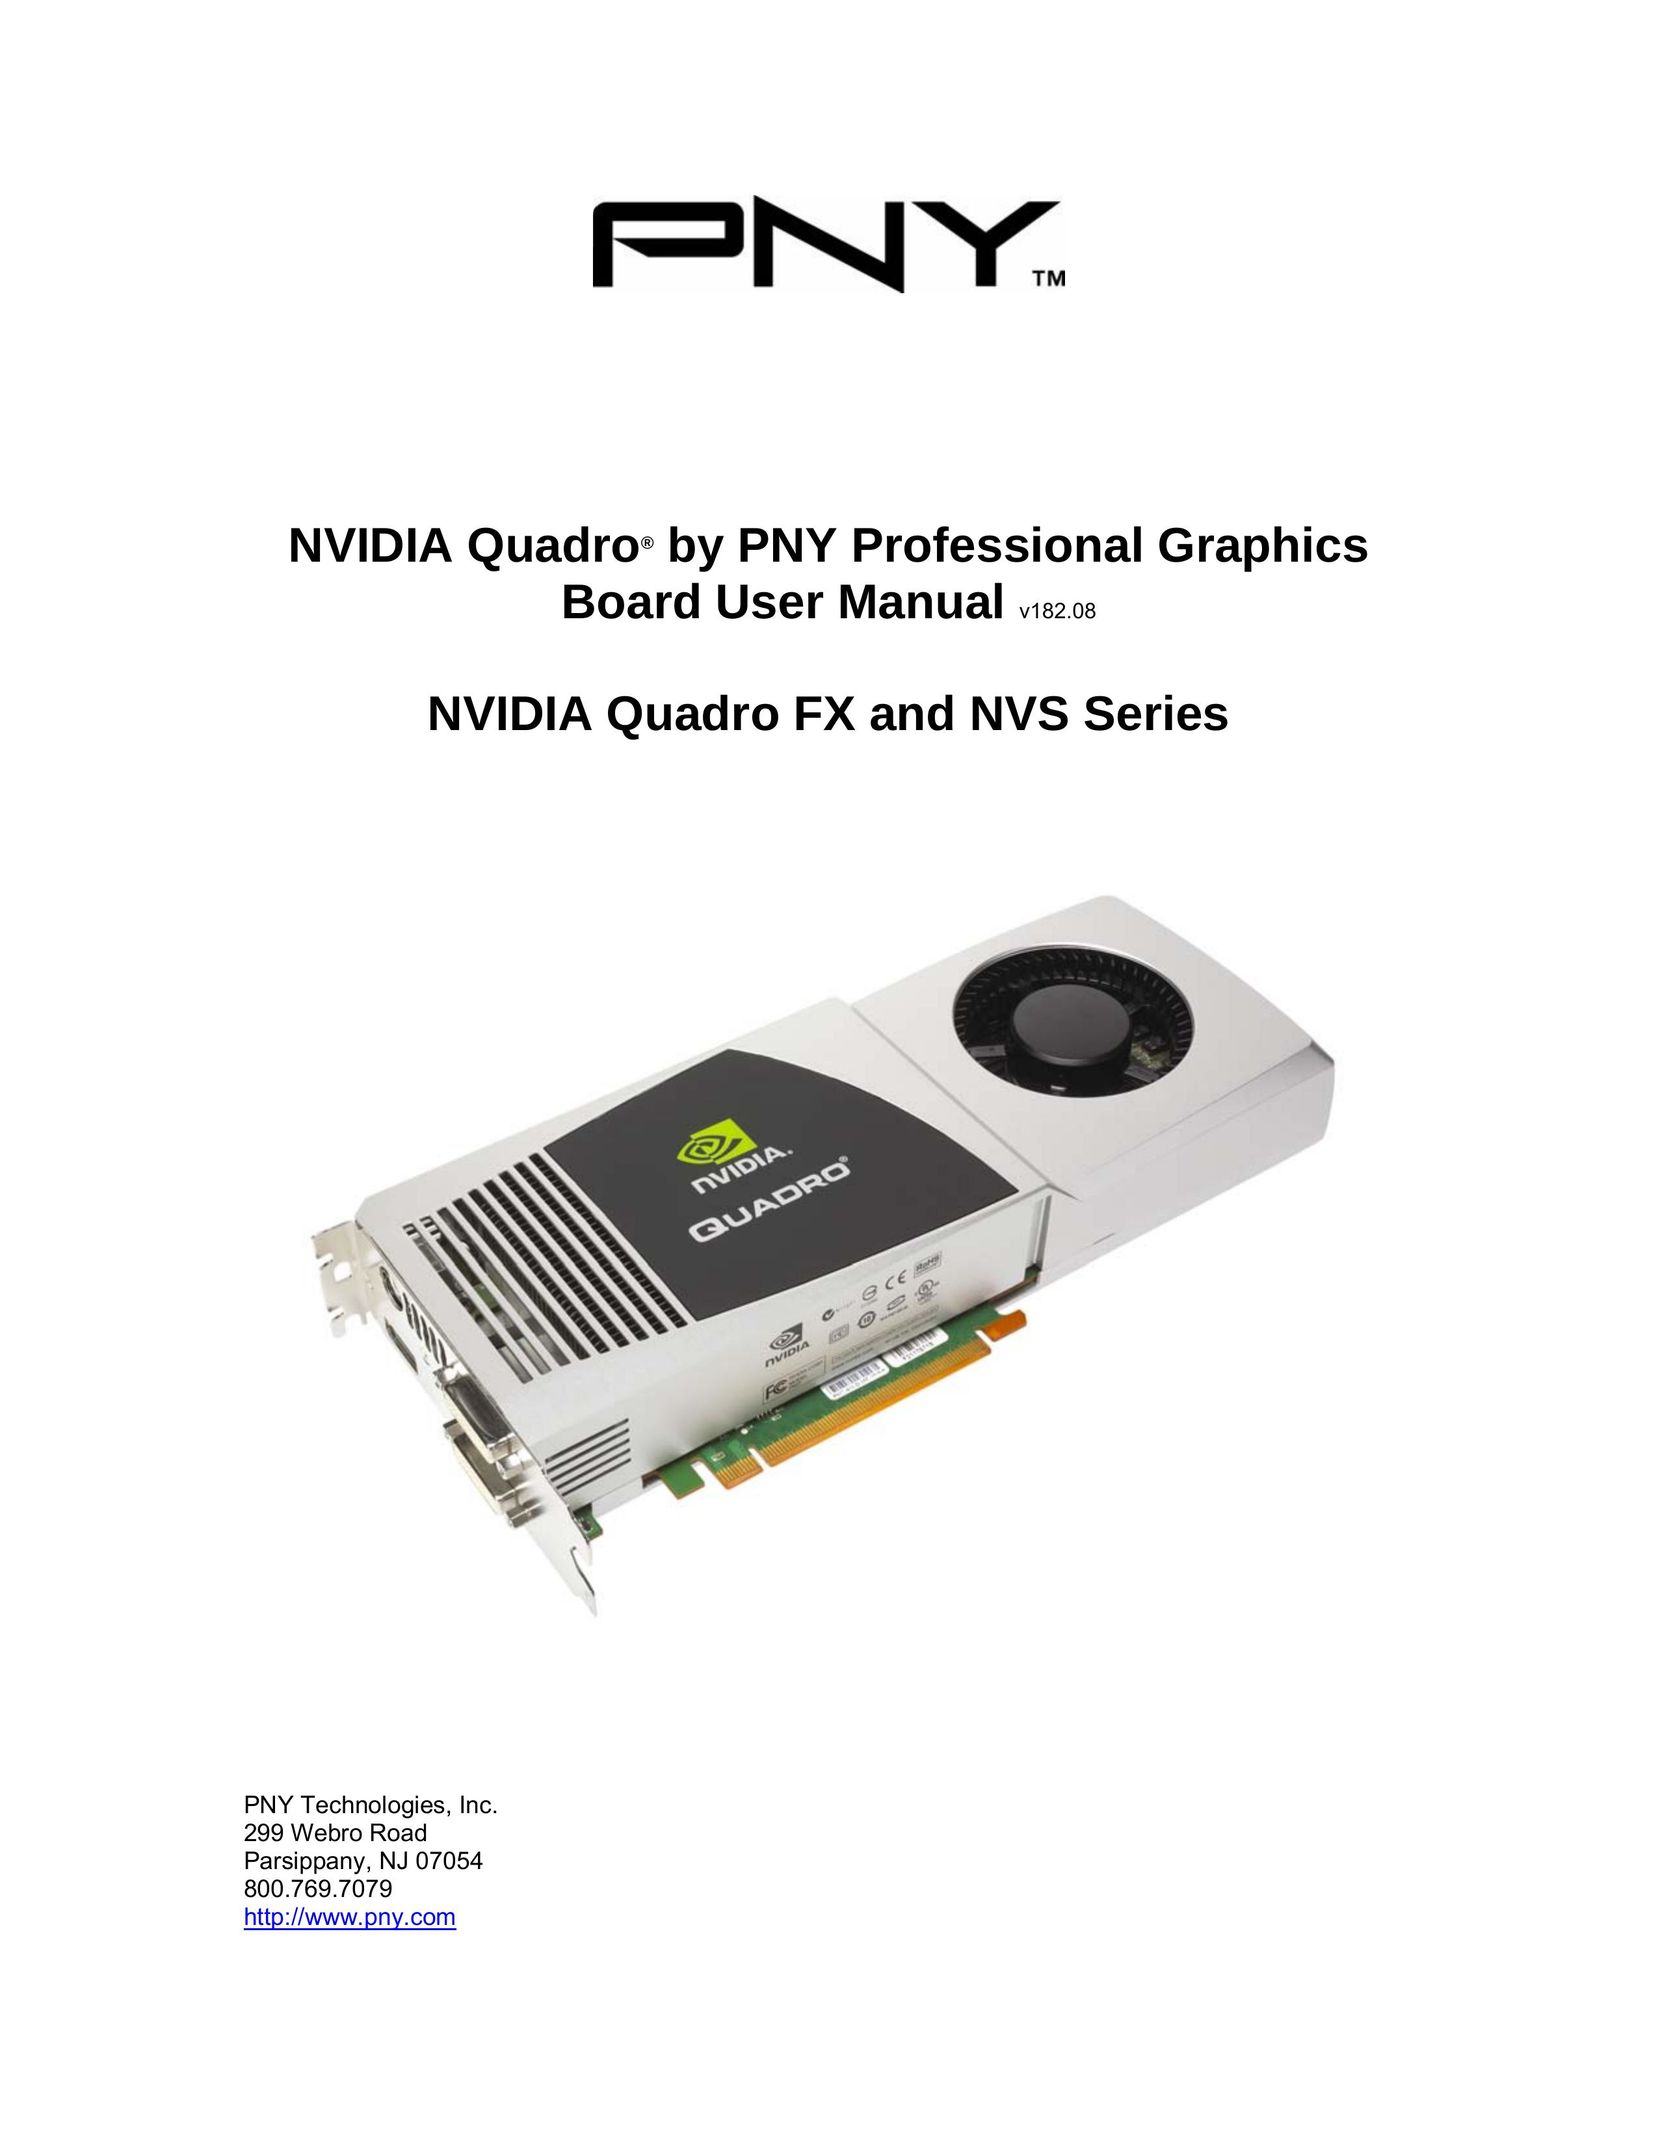 PNY FX 5800 Computer Hardware User Manual